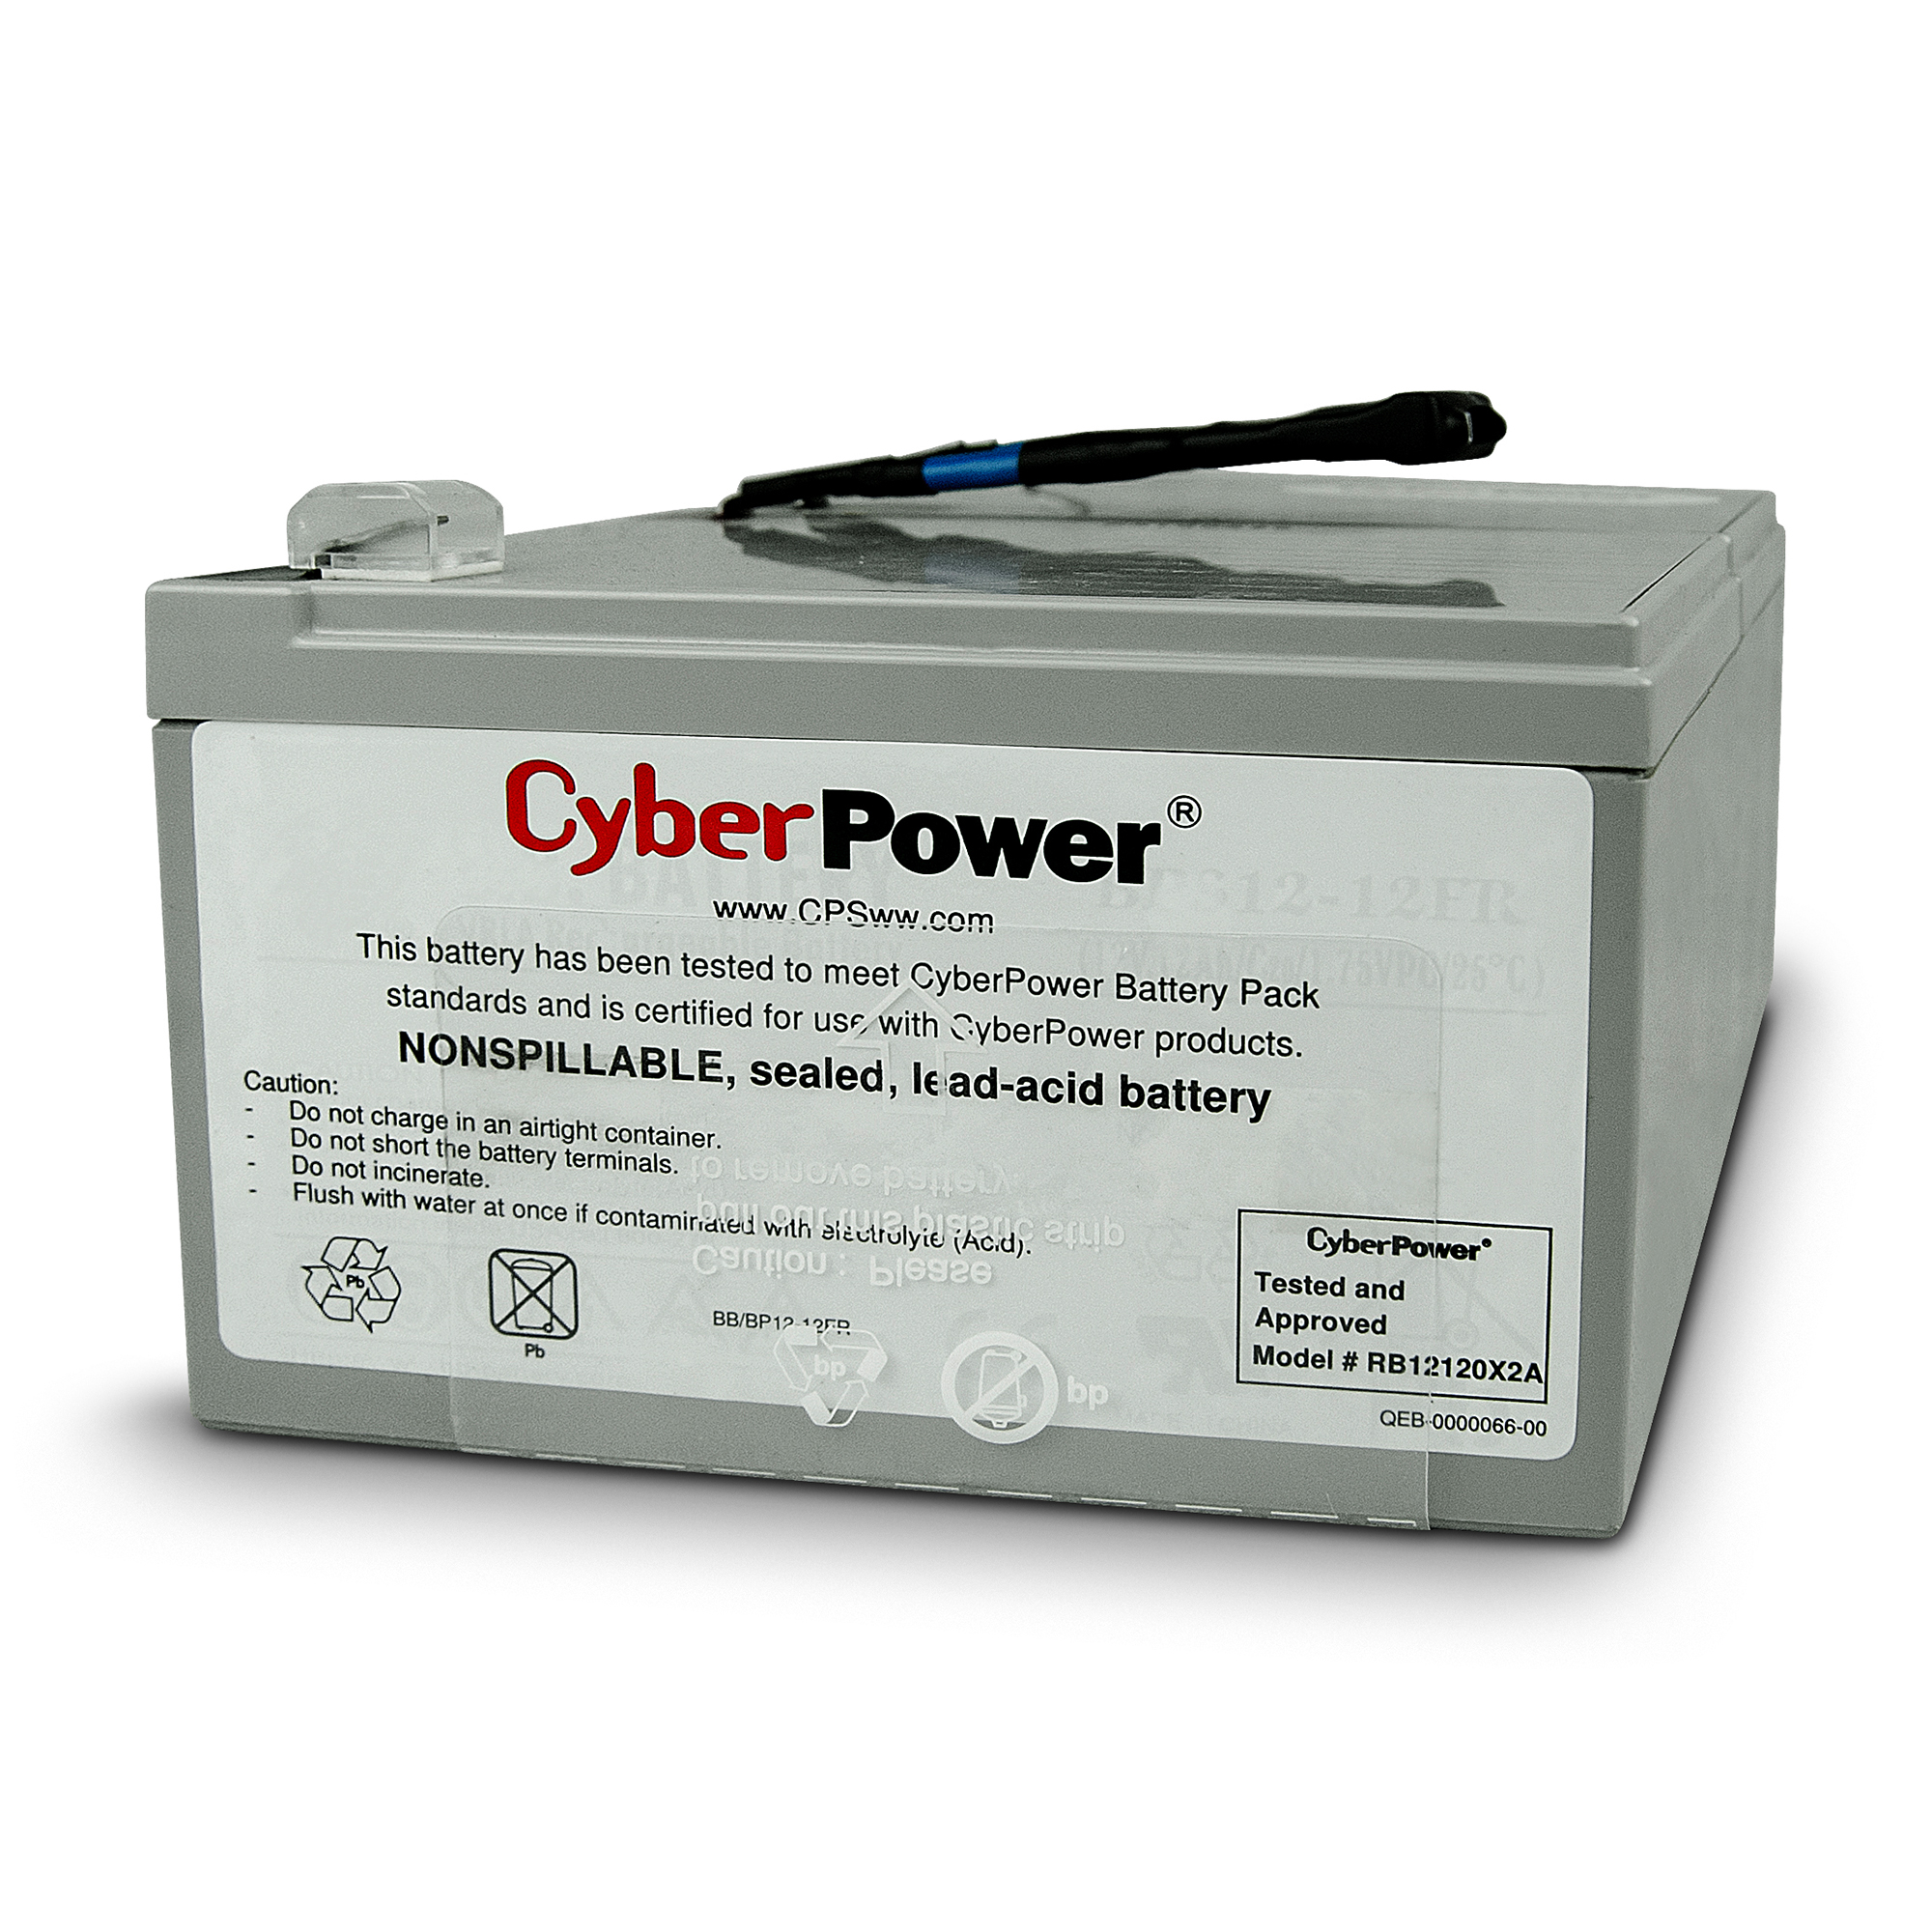 CYBERPOWER pr1000elcd. CYBERPOWER rbp0129. CYBERPOWER rbp0030. RB 12120.